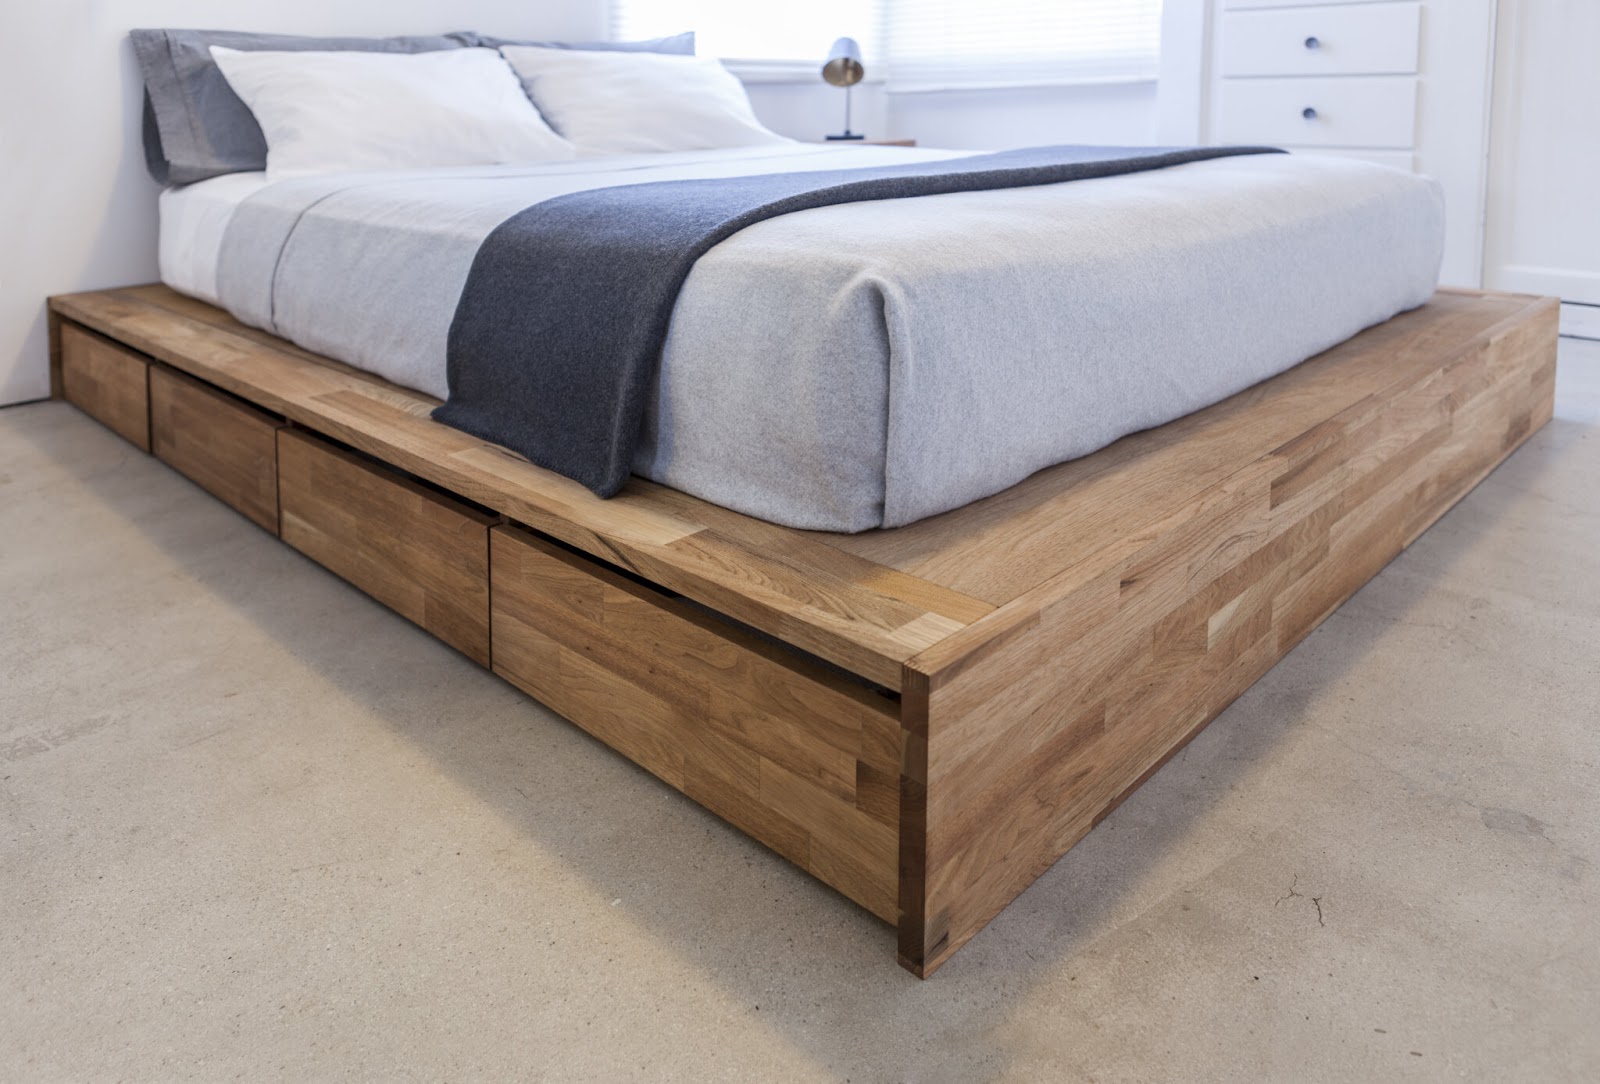 Almost any platform bed frame can be converted into a murphy bed.